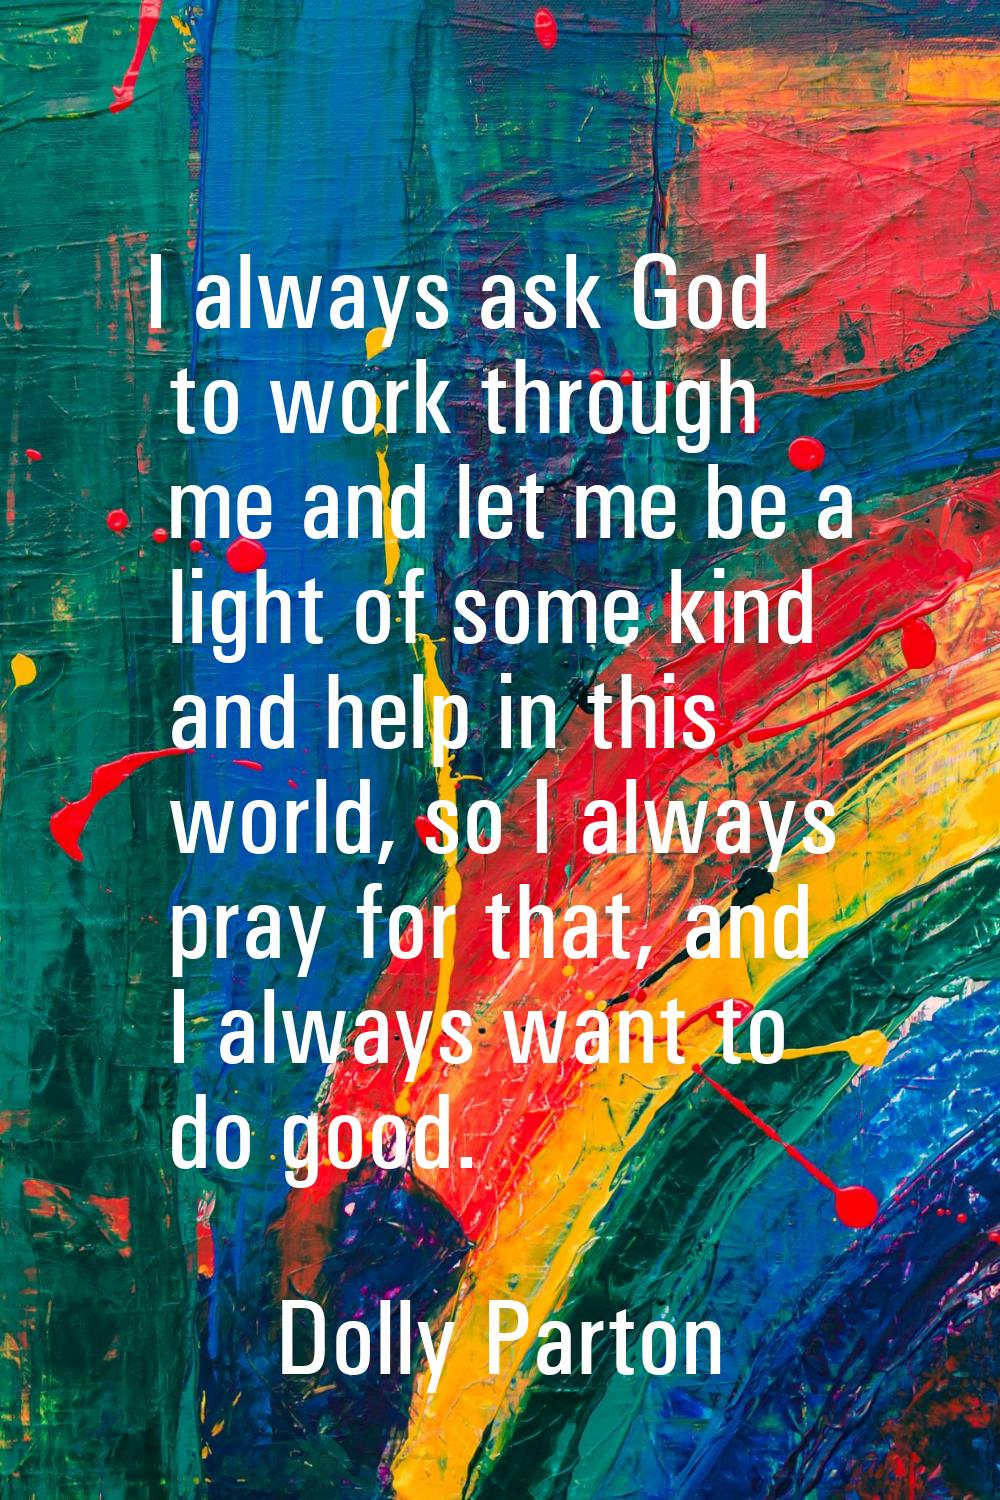 I always ask God to work through me and let me be a light of some kind and help in this world, so I